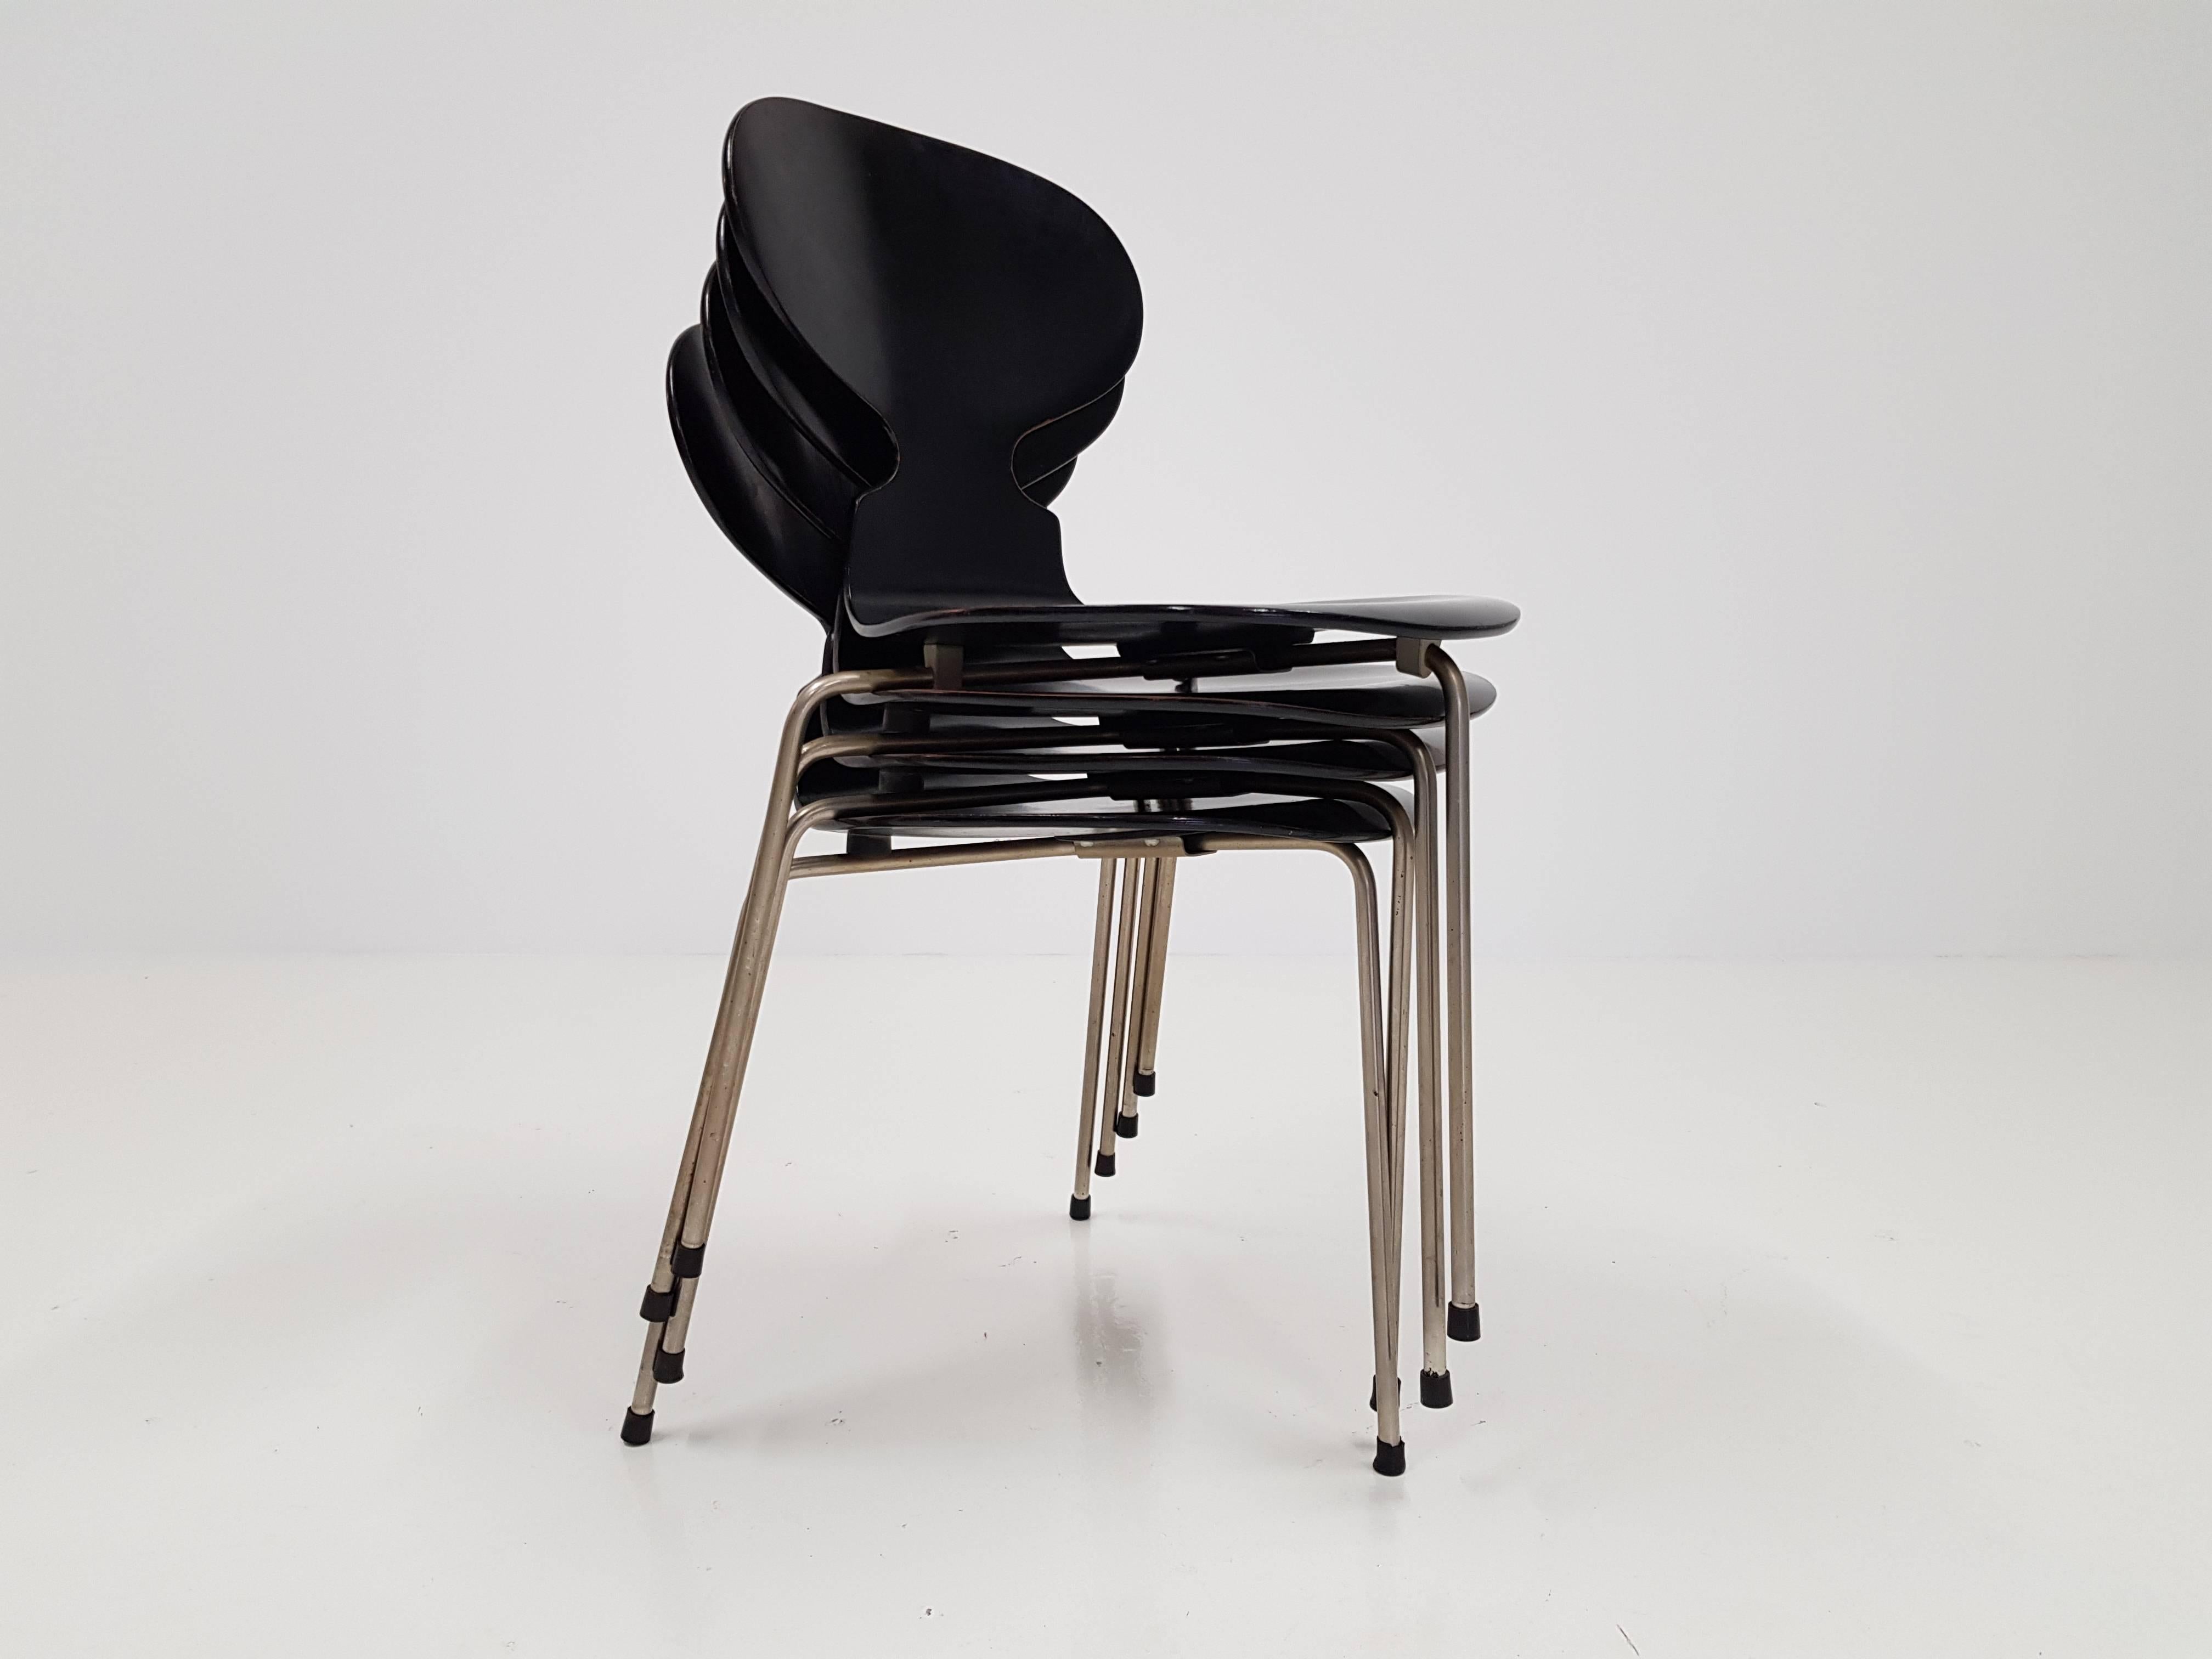 20th Century Early Model 3100 'Ant' Chairs by Arne Jacobsen for Fritz Hansen Designed in 1952